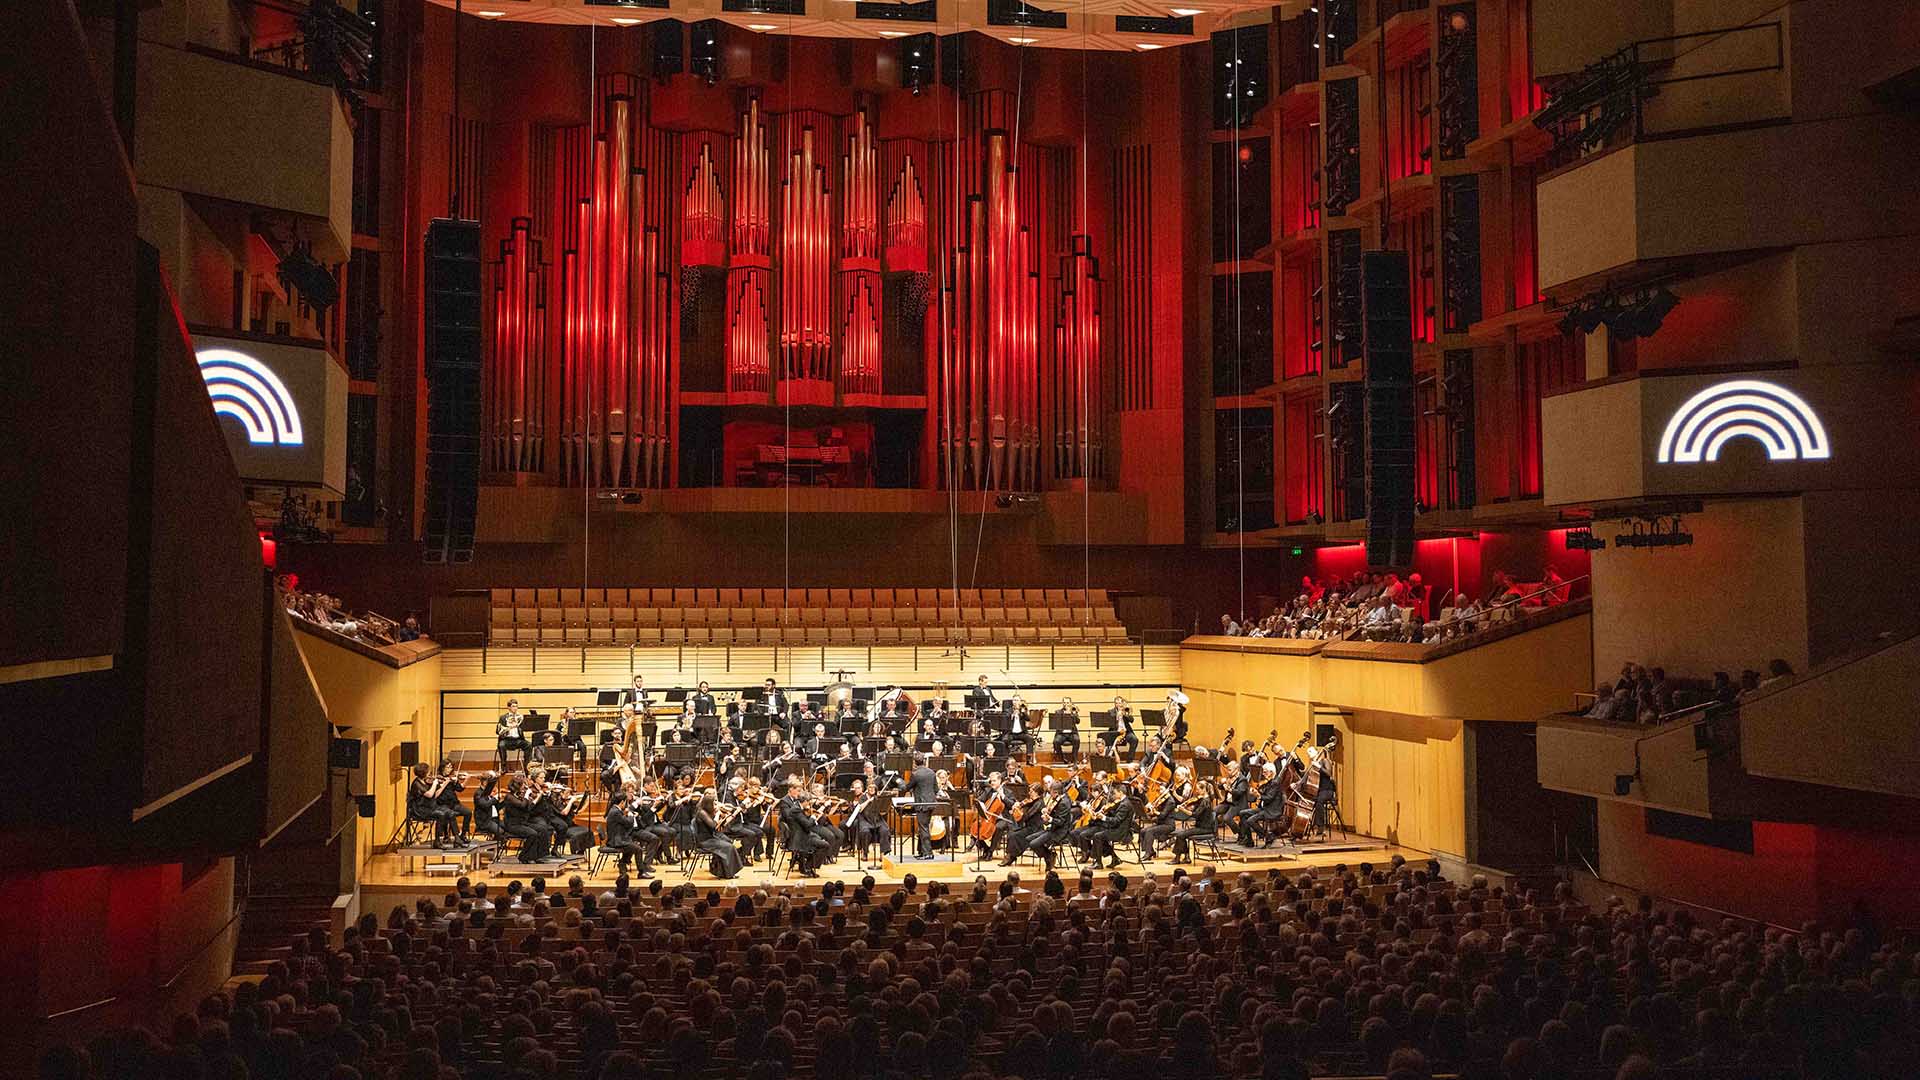 Queensland Symphony Orchestra Is Hosting a Big Free 75th Birthday Concert at QPAC